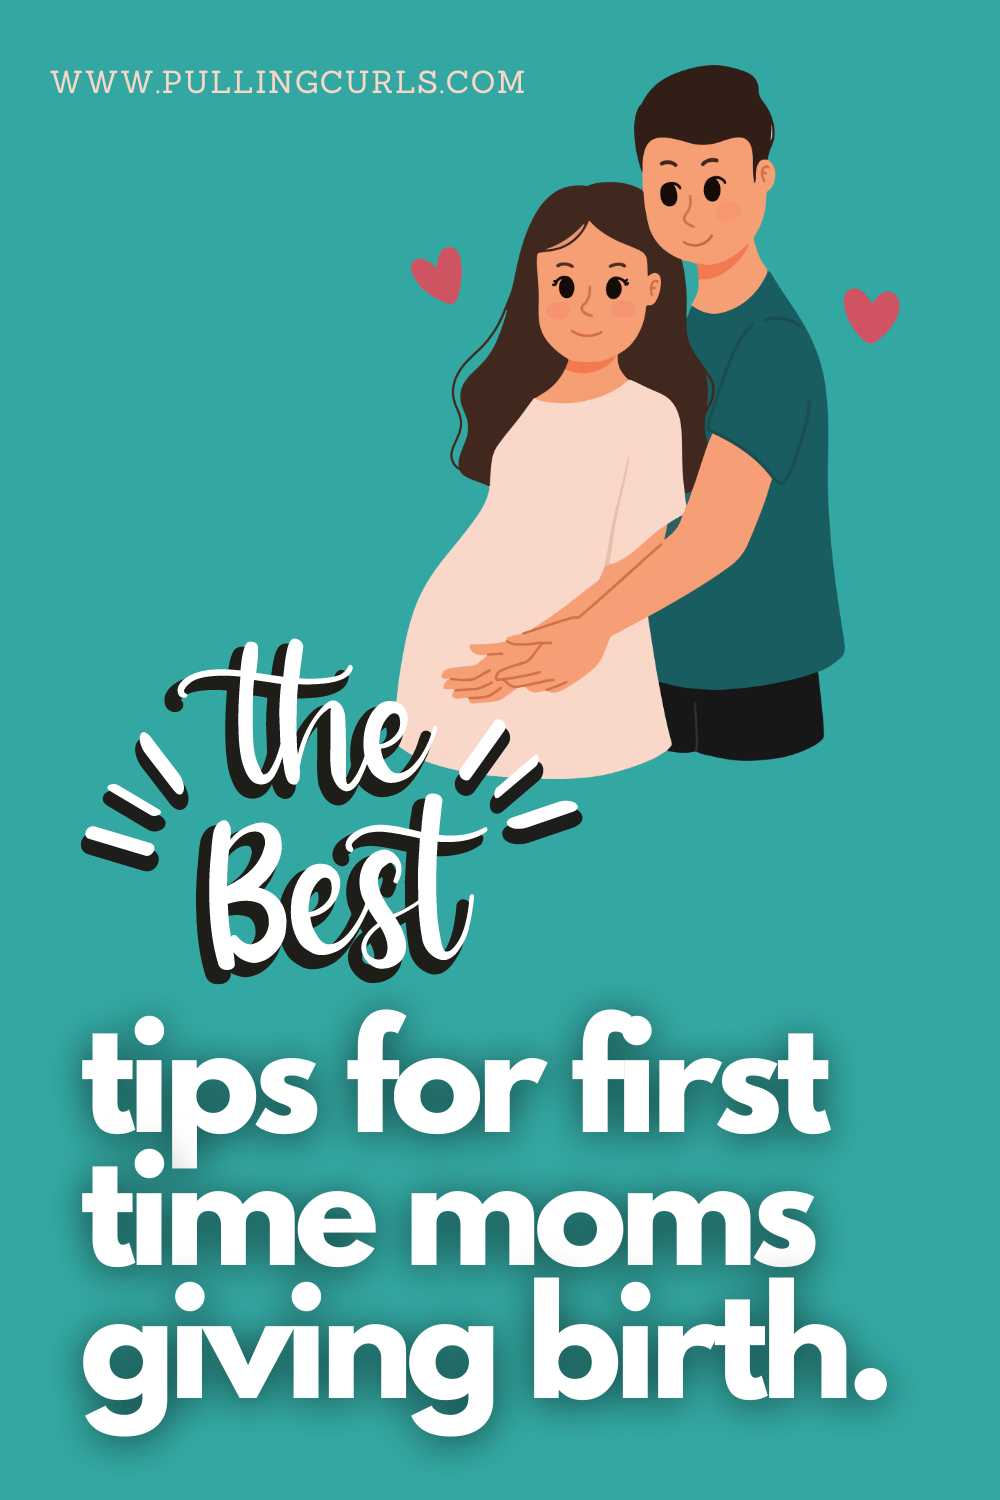 pregnant couple in love -- the best tips for first time moms giving birth. via @pullingcurls